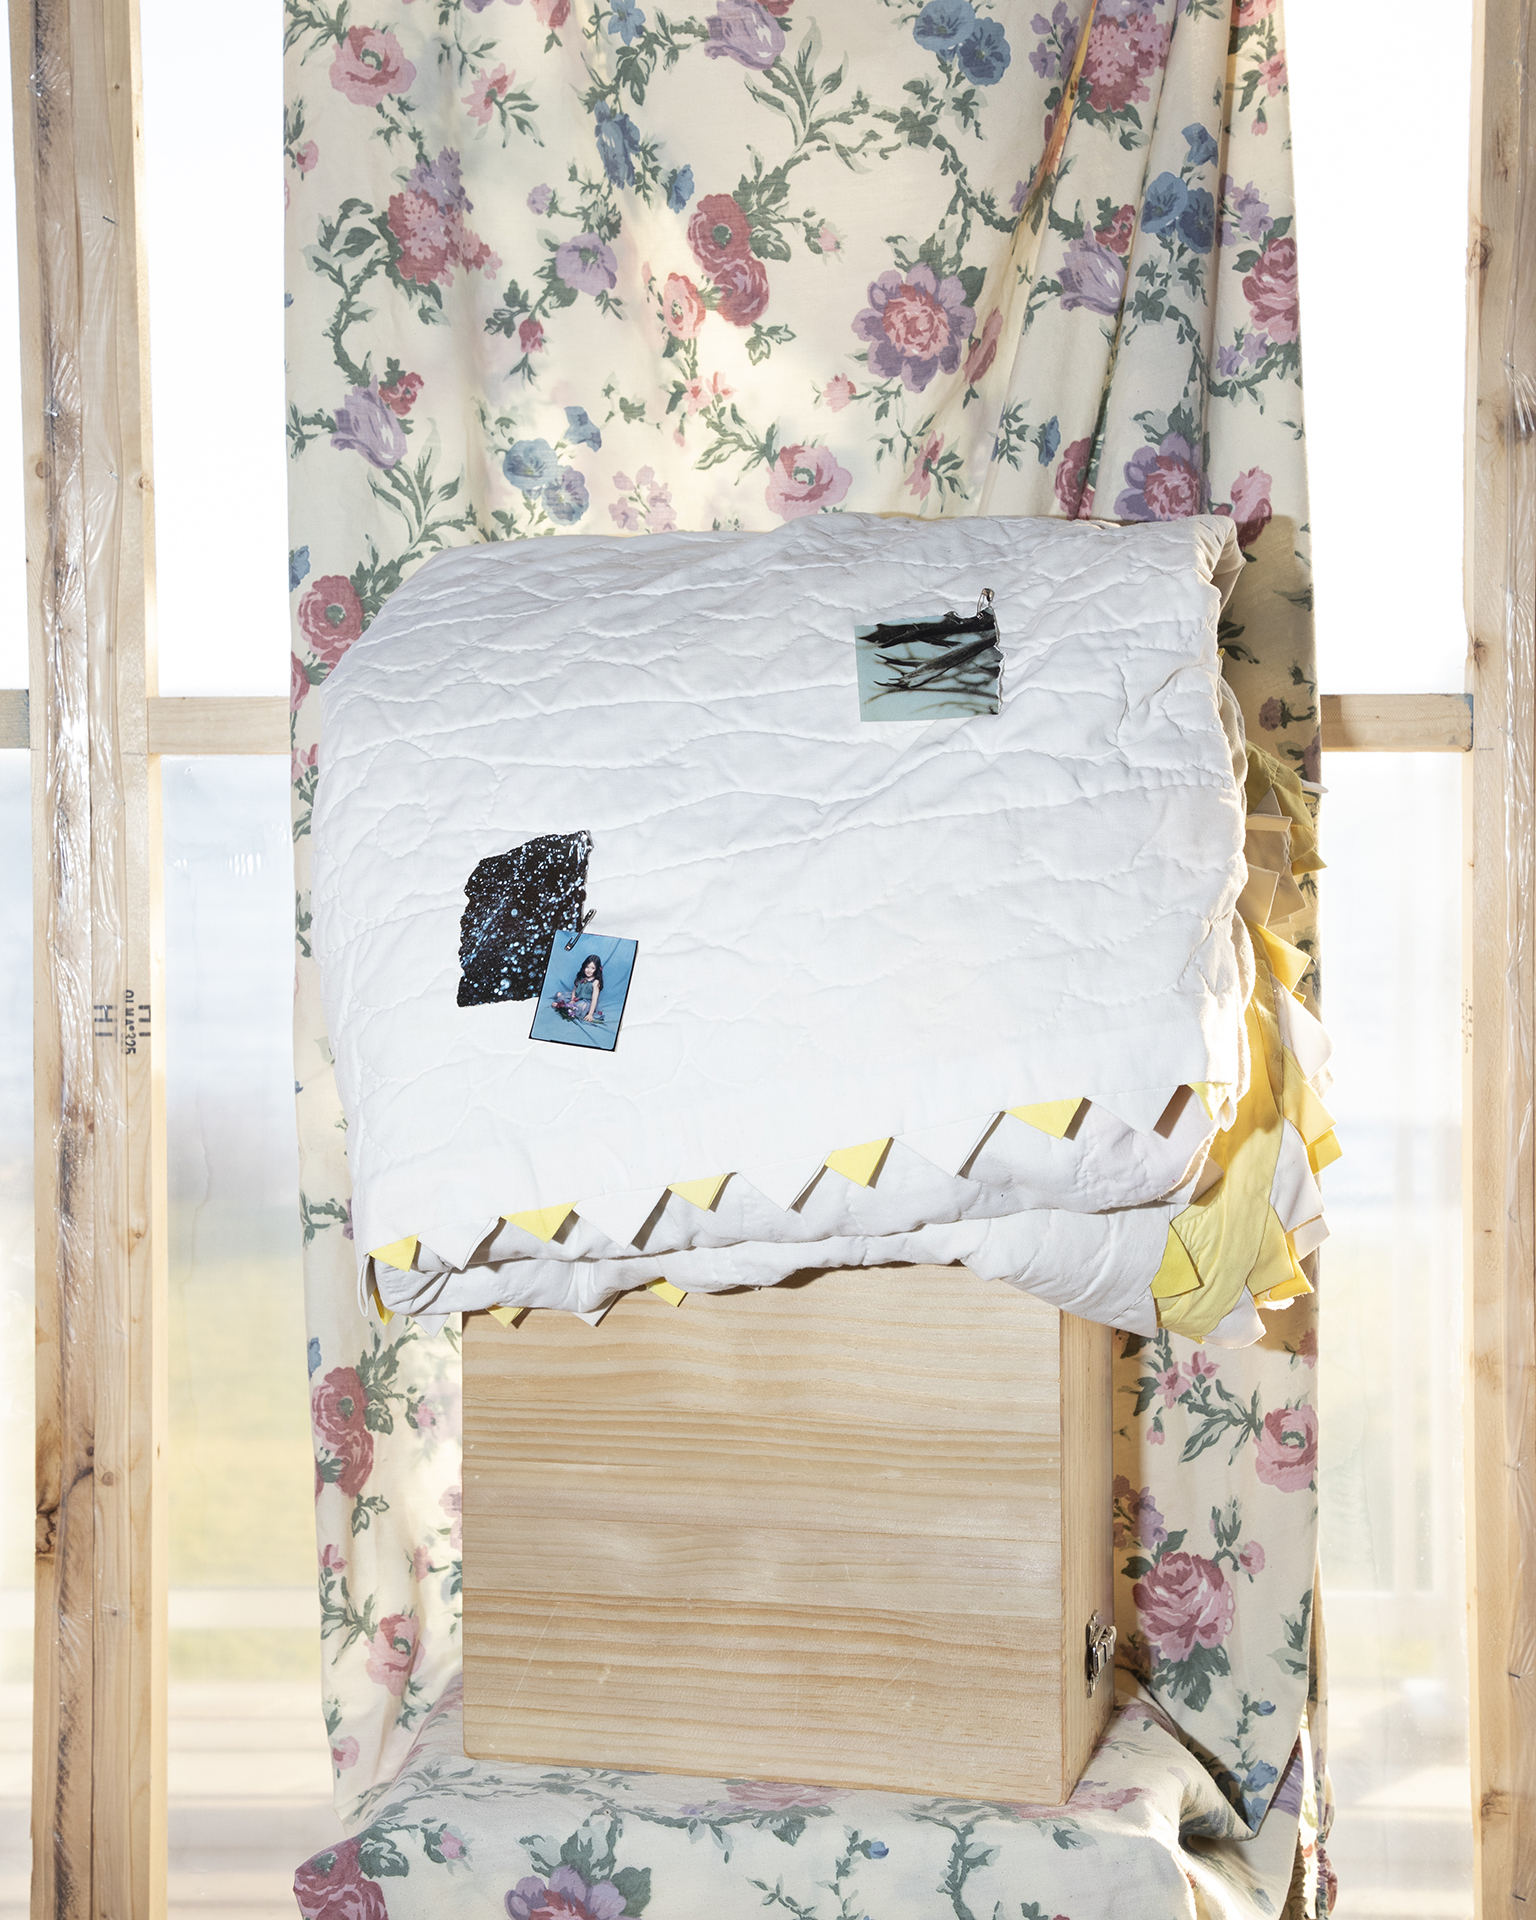 Untitled #2: A quilt with pinned-on archival family photos of a young girl. The quilt sits on a pile of wood in front of a floral sheet, inside a sunroom.